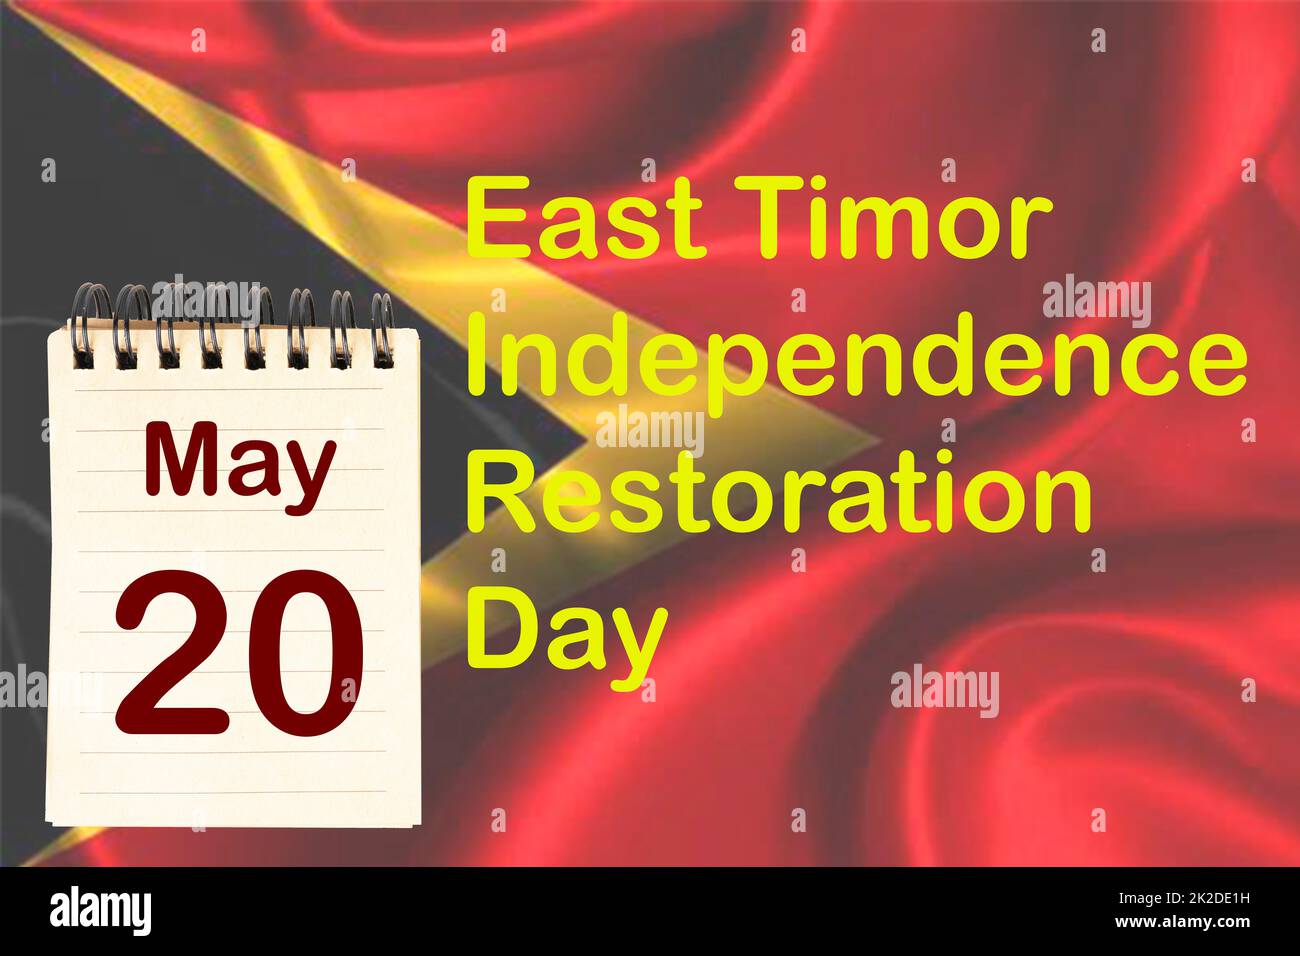 East Timor Independence Restoration Day Stock Photo